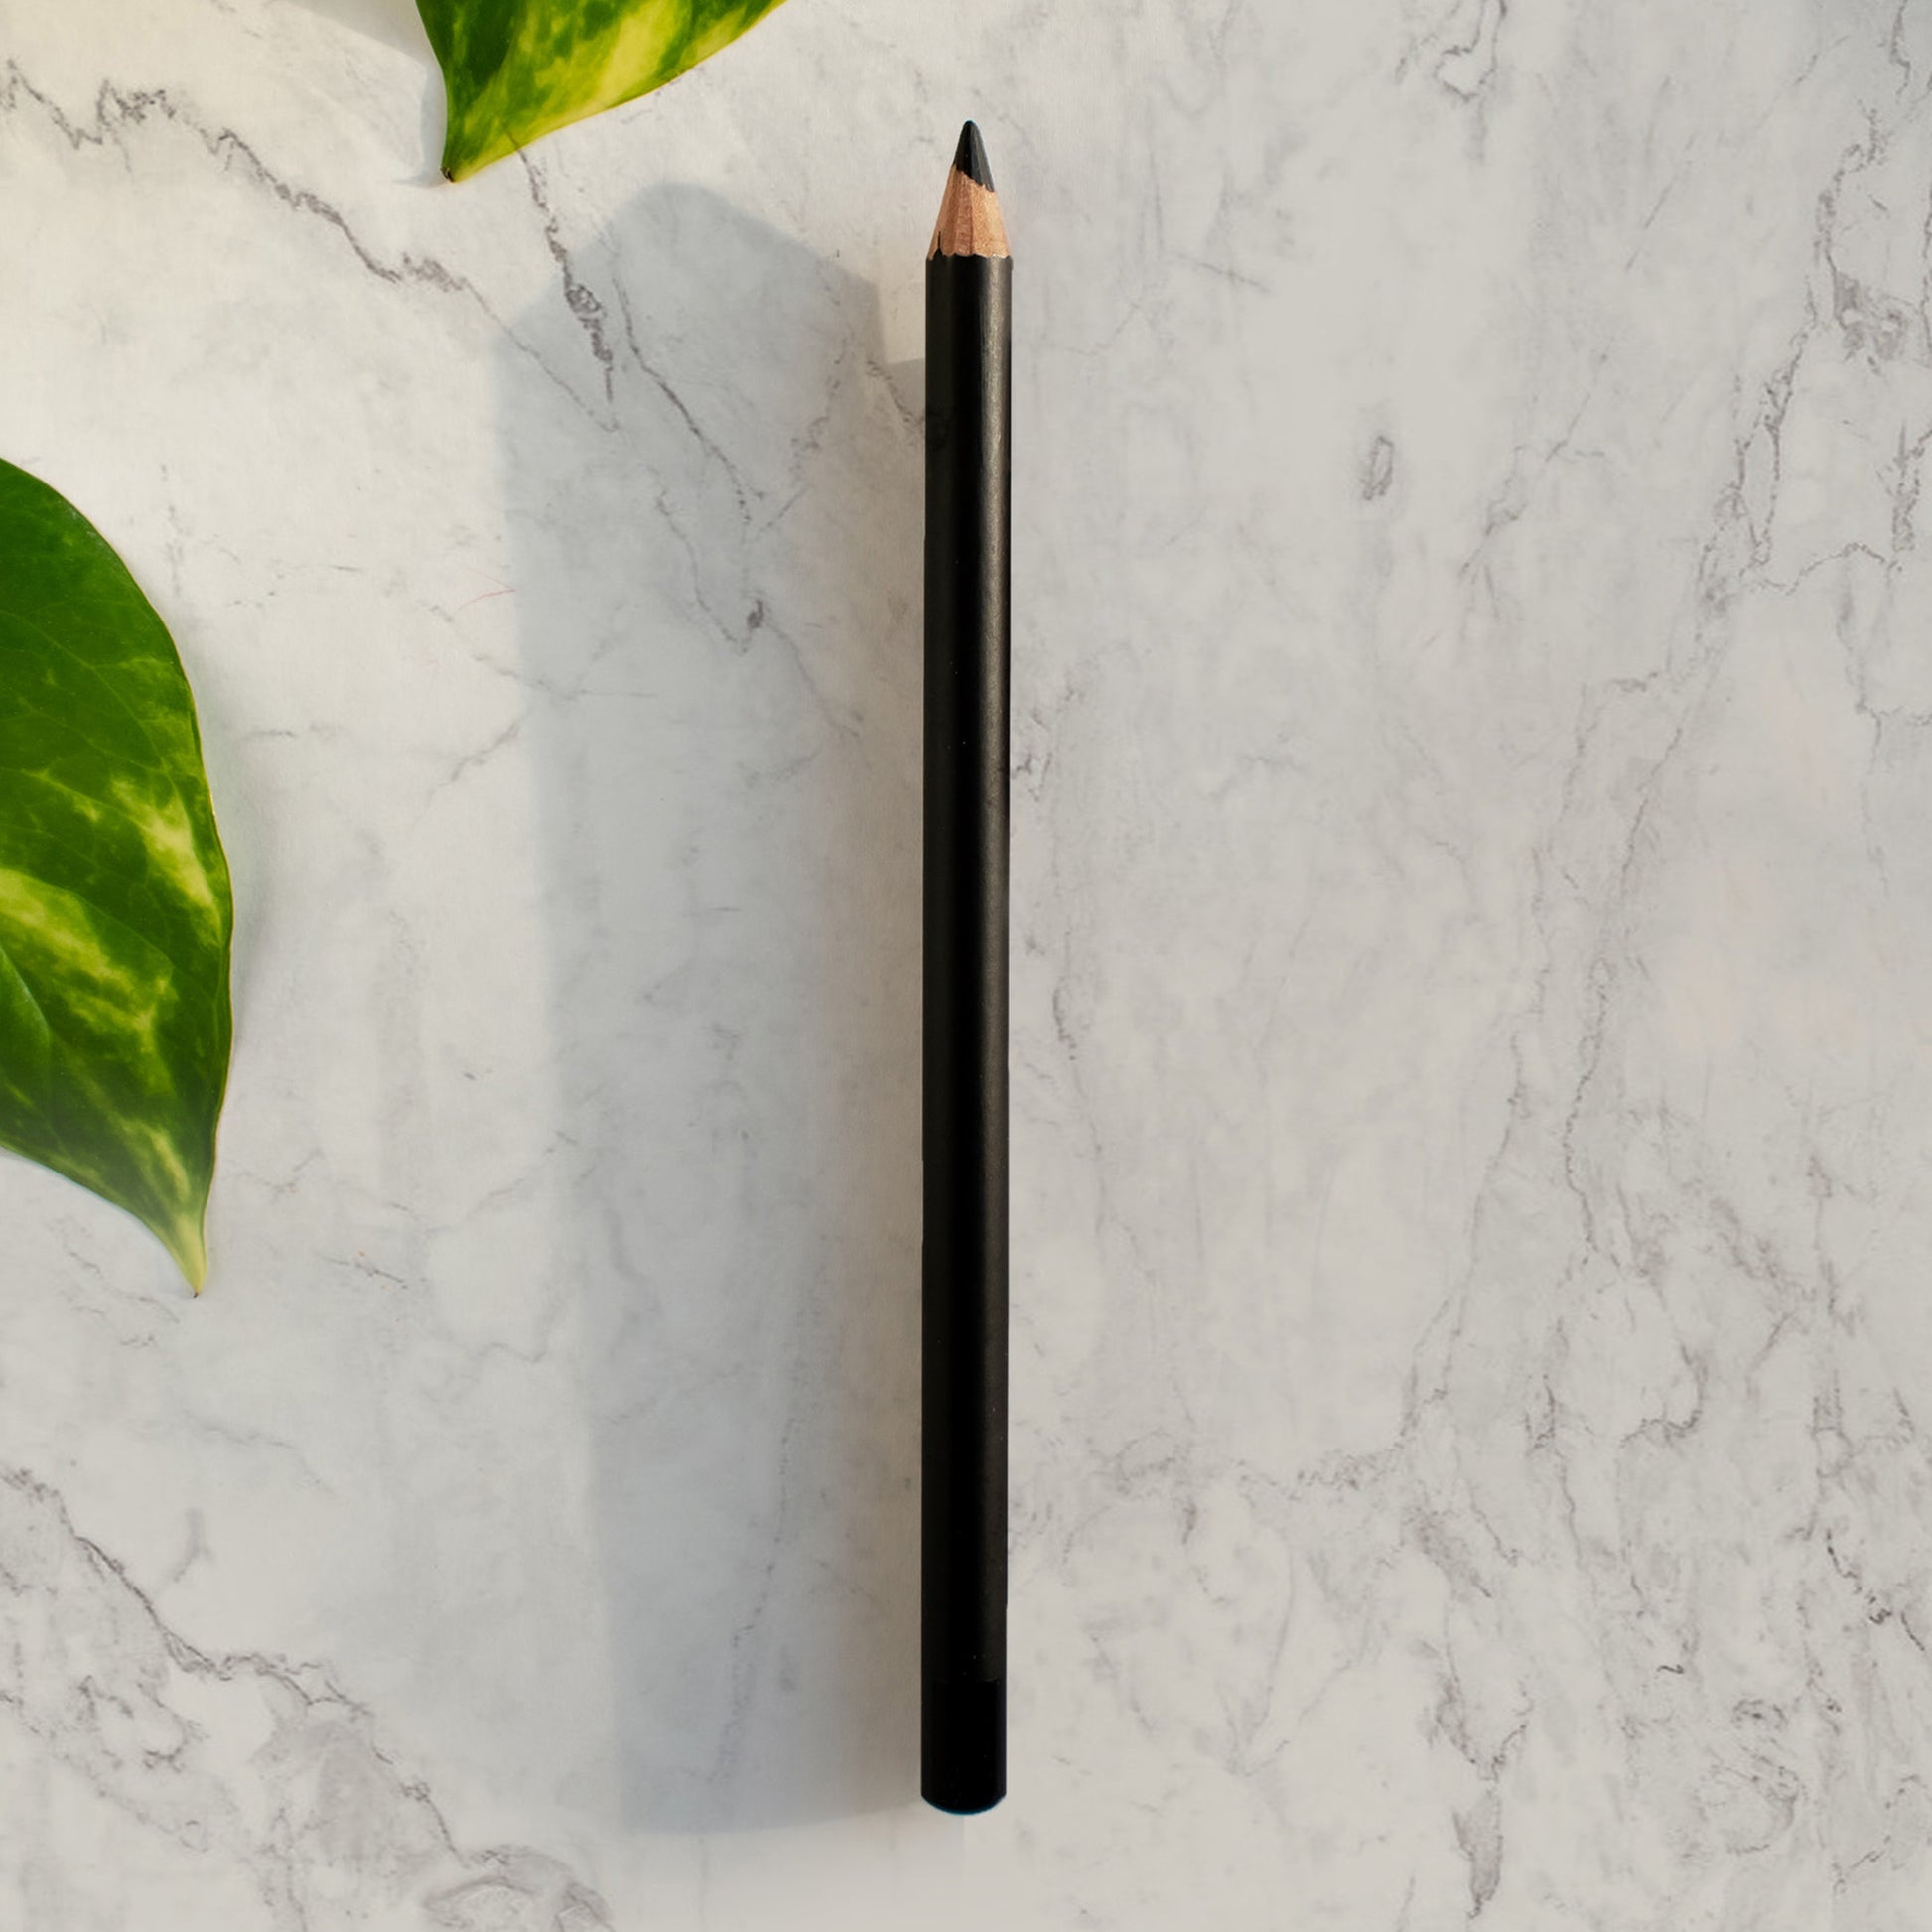 Cruisin Organics Glory lip pencil for a smile for any occasion - from country club events to Pilates class! Step out of your comfort zone and make a bold statement.